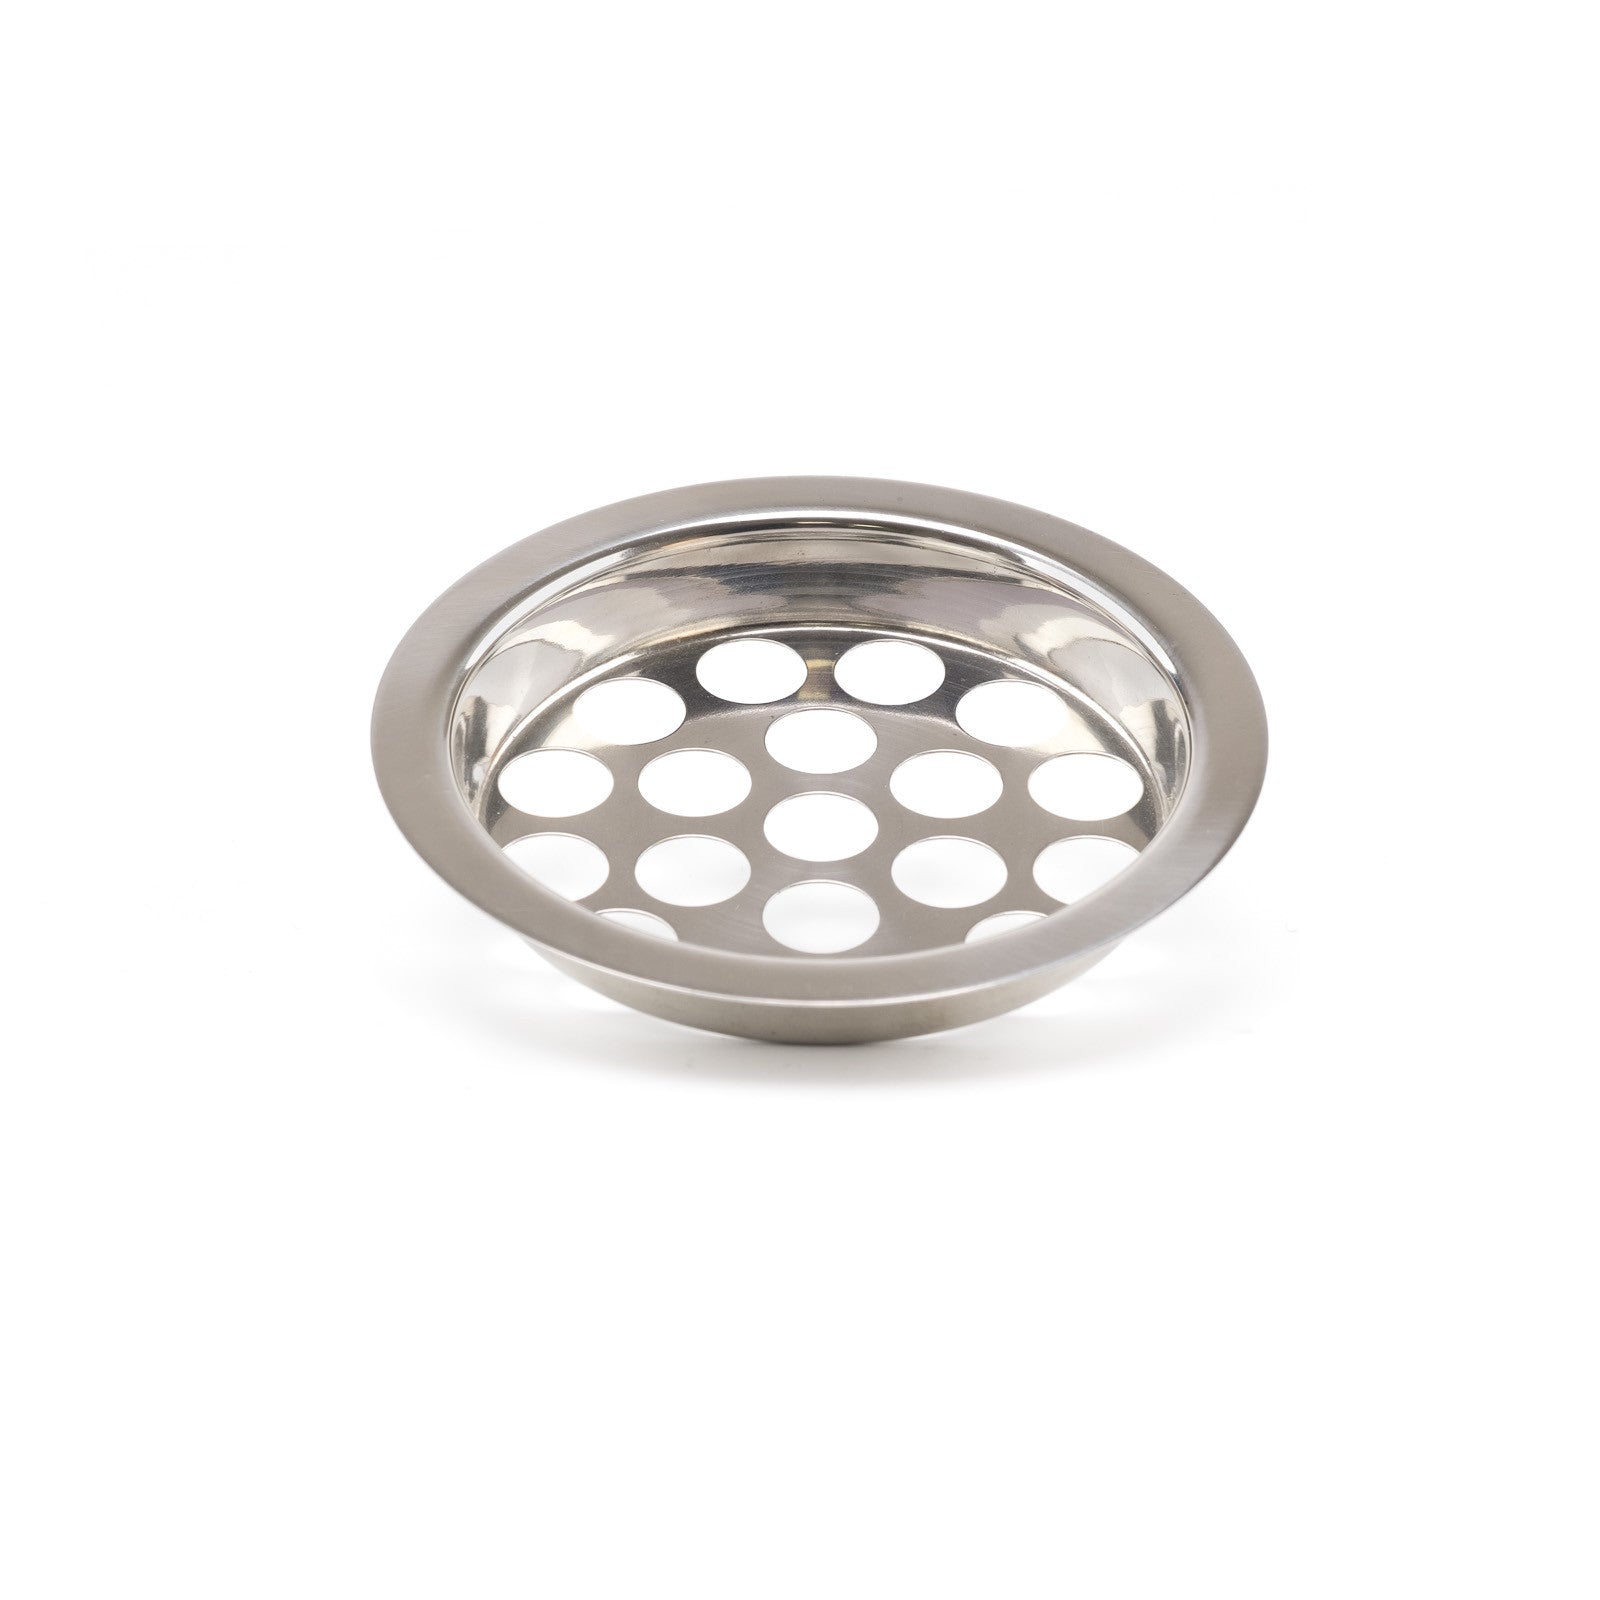 Stainless Steel Ash Tray Screen